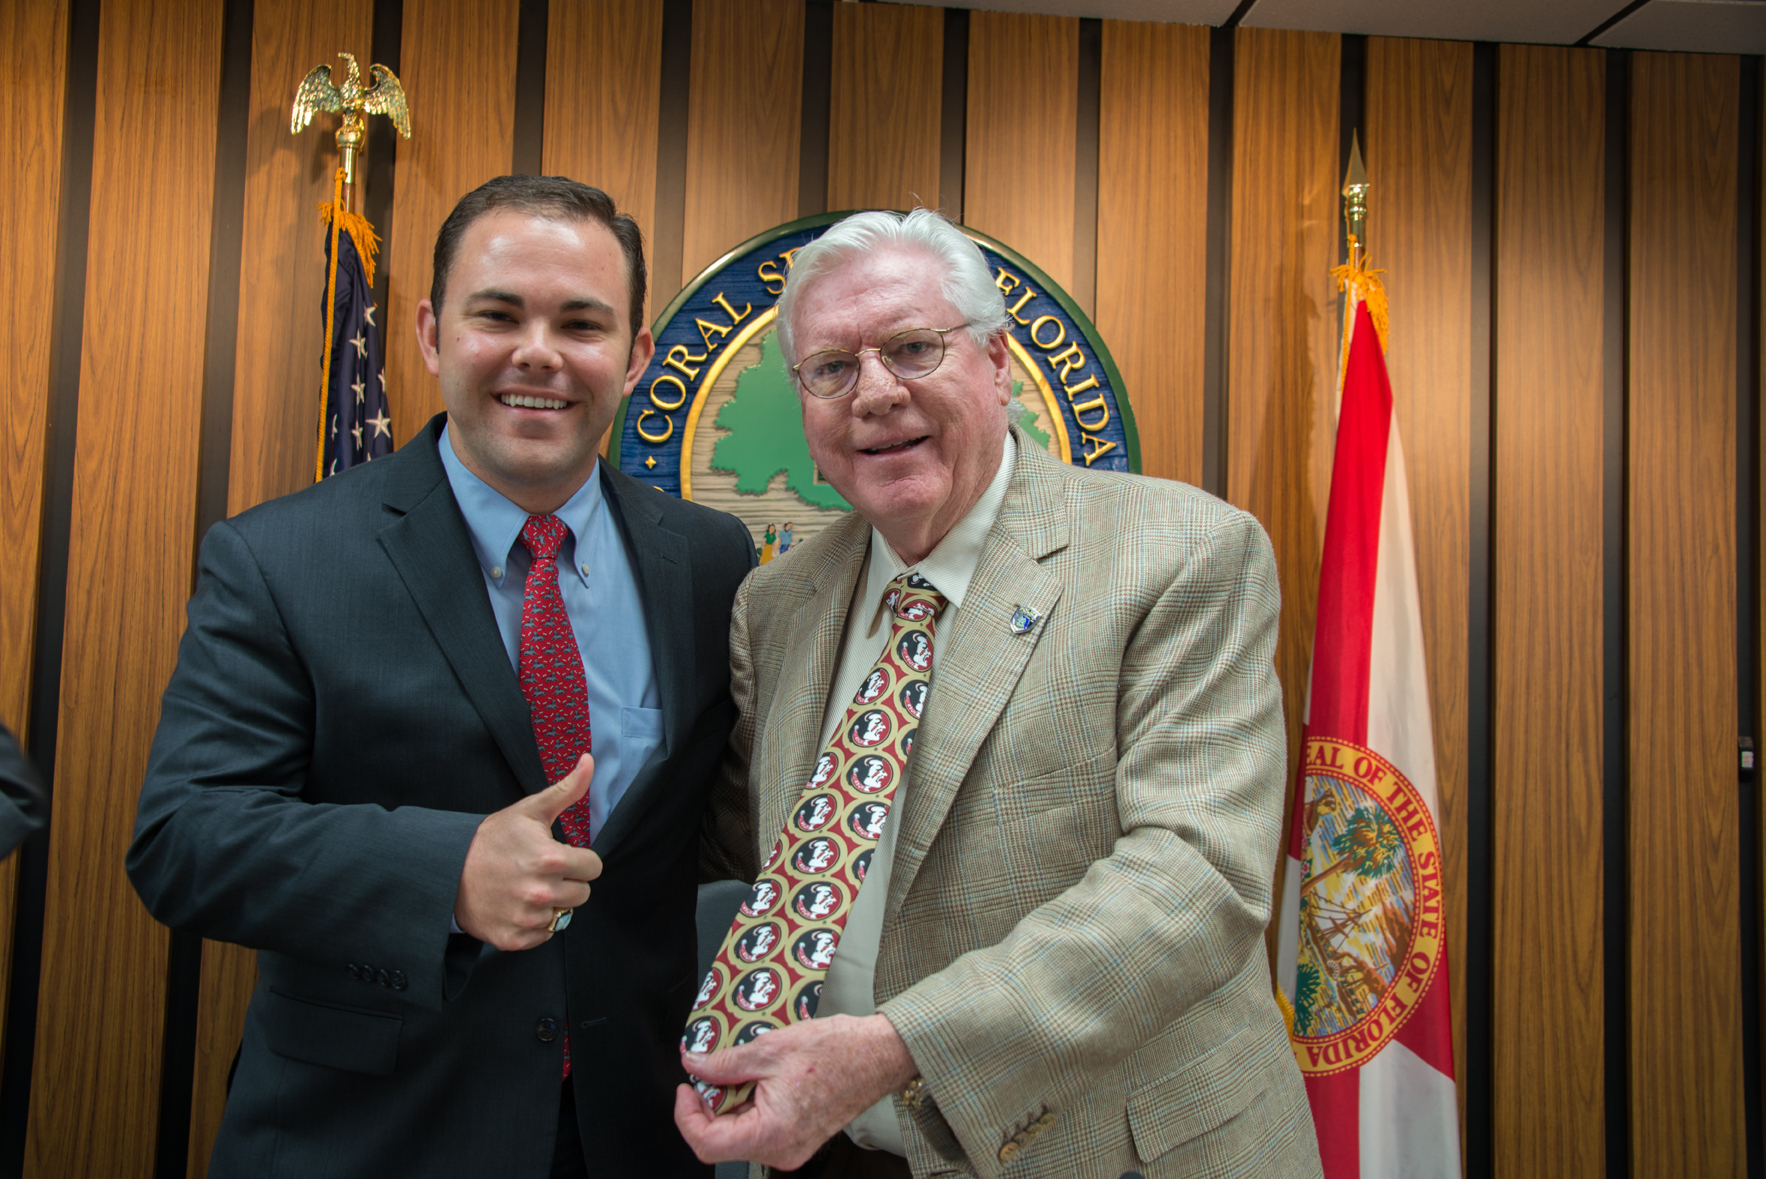 Vice Mayor Dan Daley with Mayor Skip Campbell. Daley, an FSU alum, gifted Campbell, UF alum,  with a tie from his Alma Mater after Campbell placed his bets on UF winning the game - and losing for the third year in a row.   